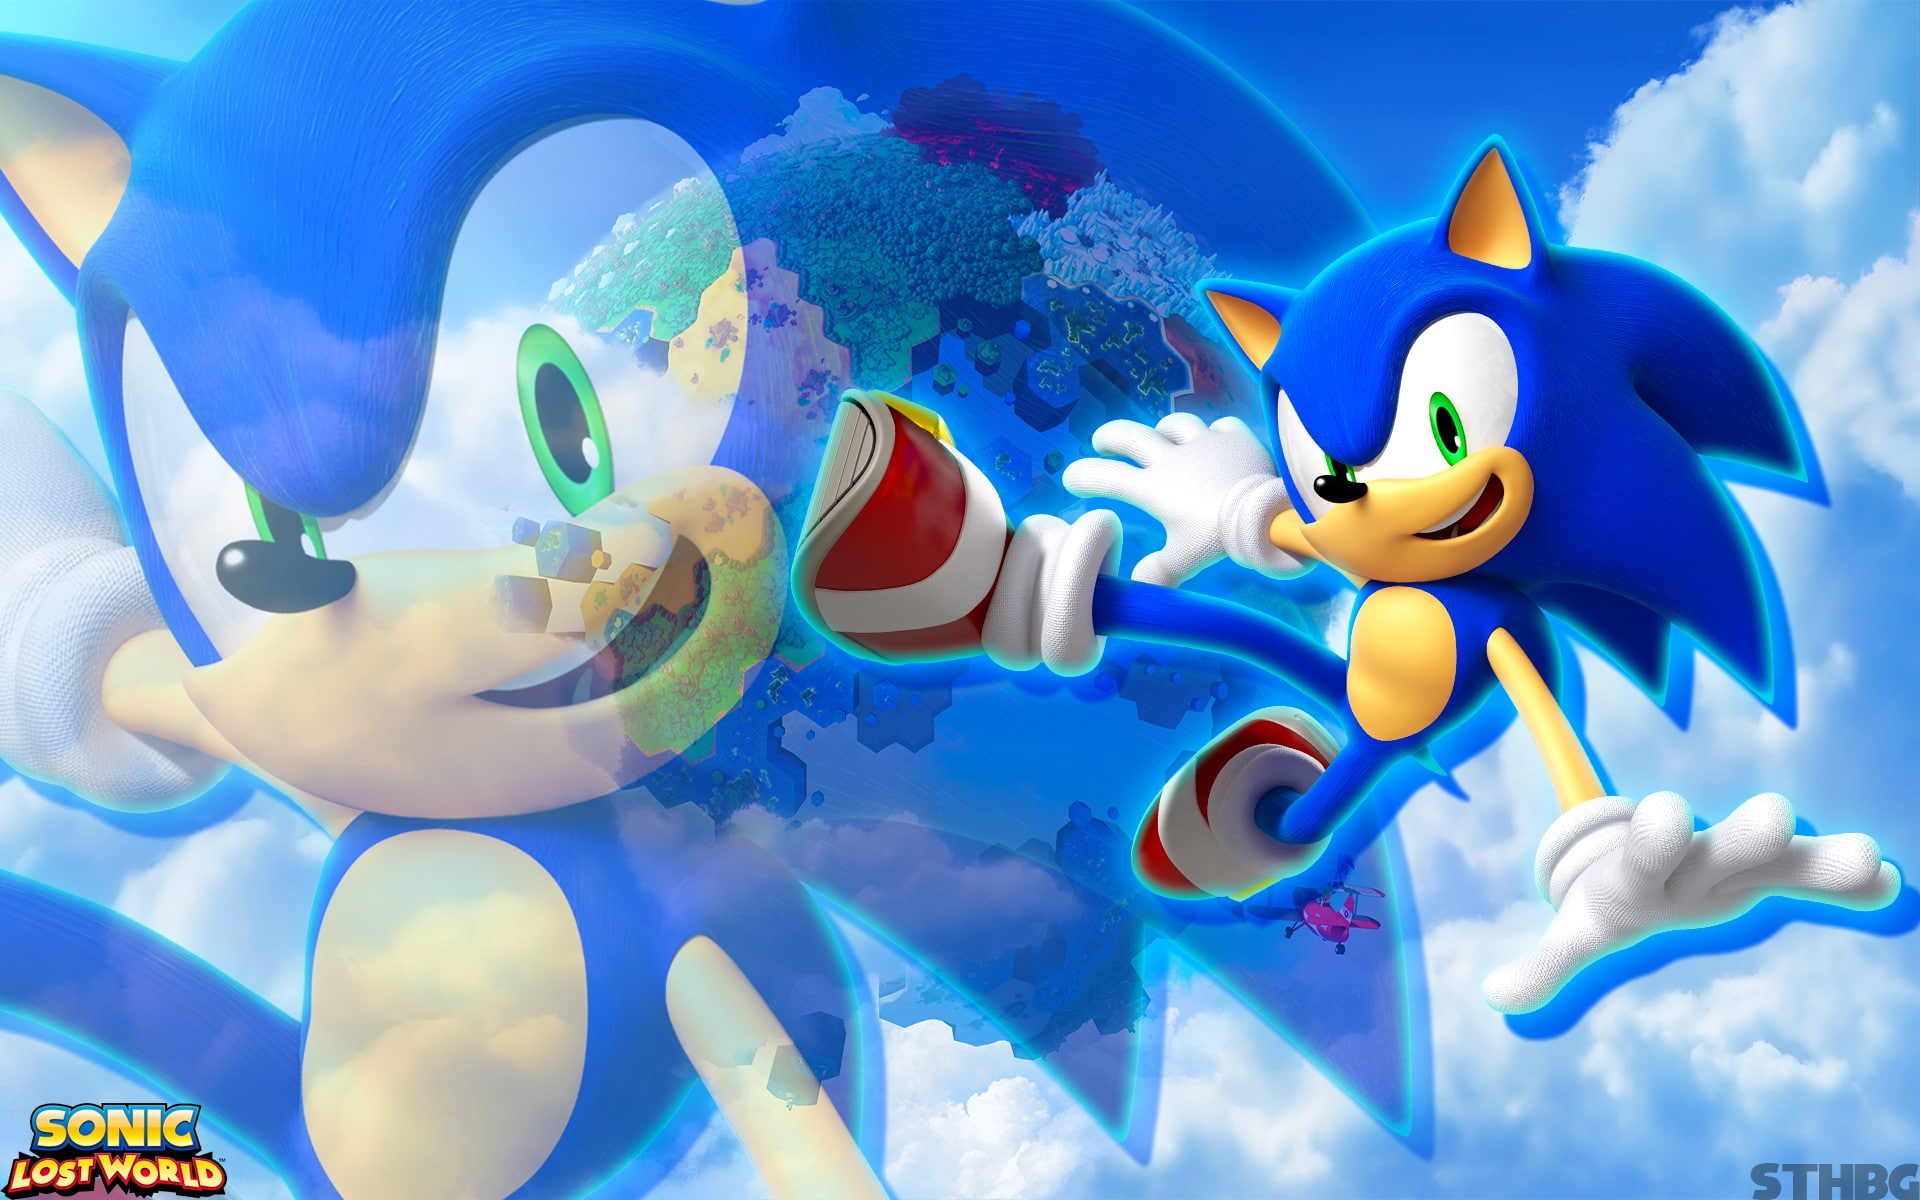 Wallpaper Sonic The Hedgehog, Sonic Lost World, Sonic, Game